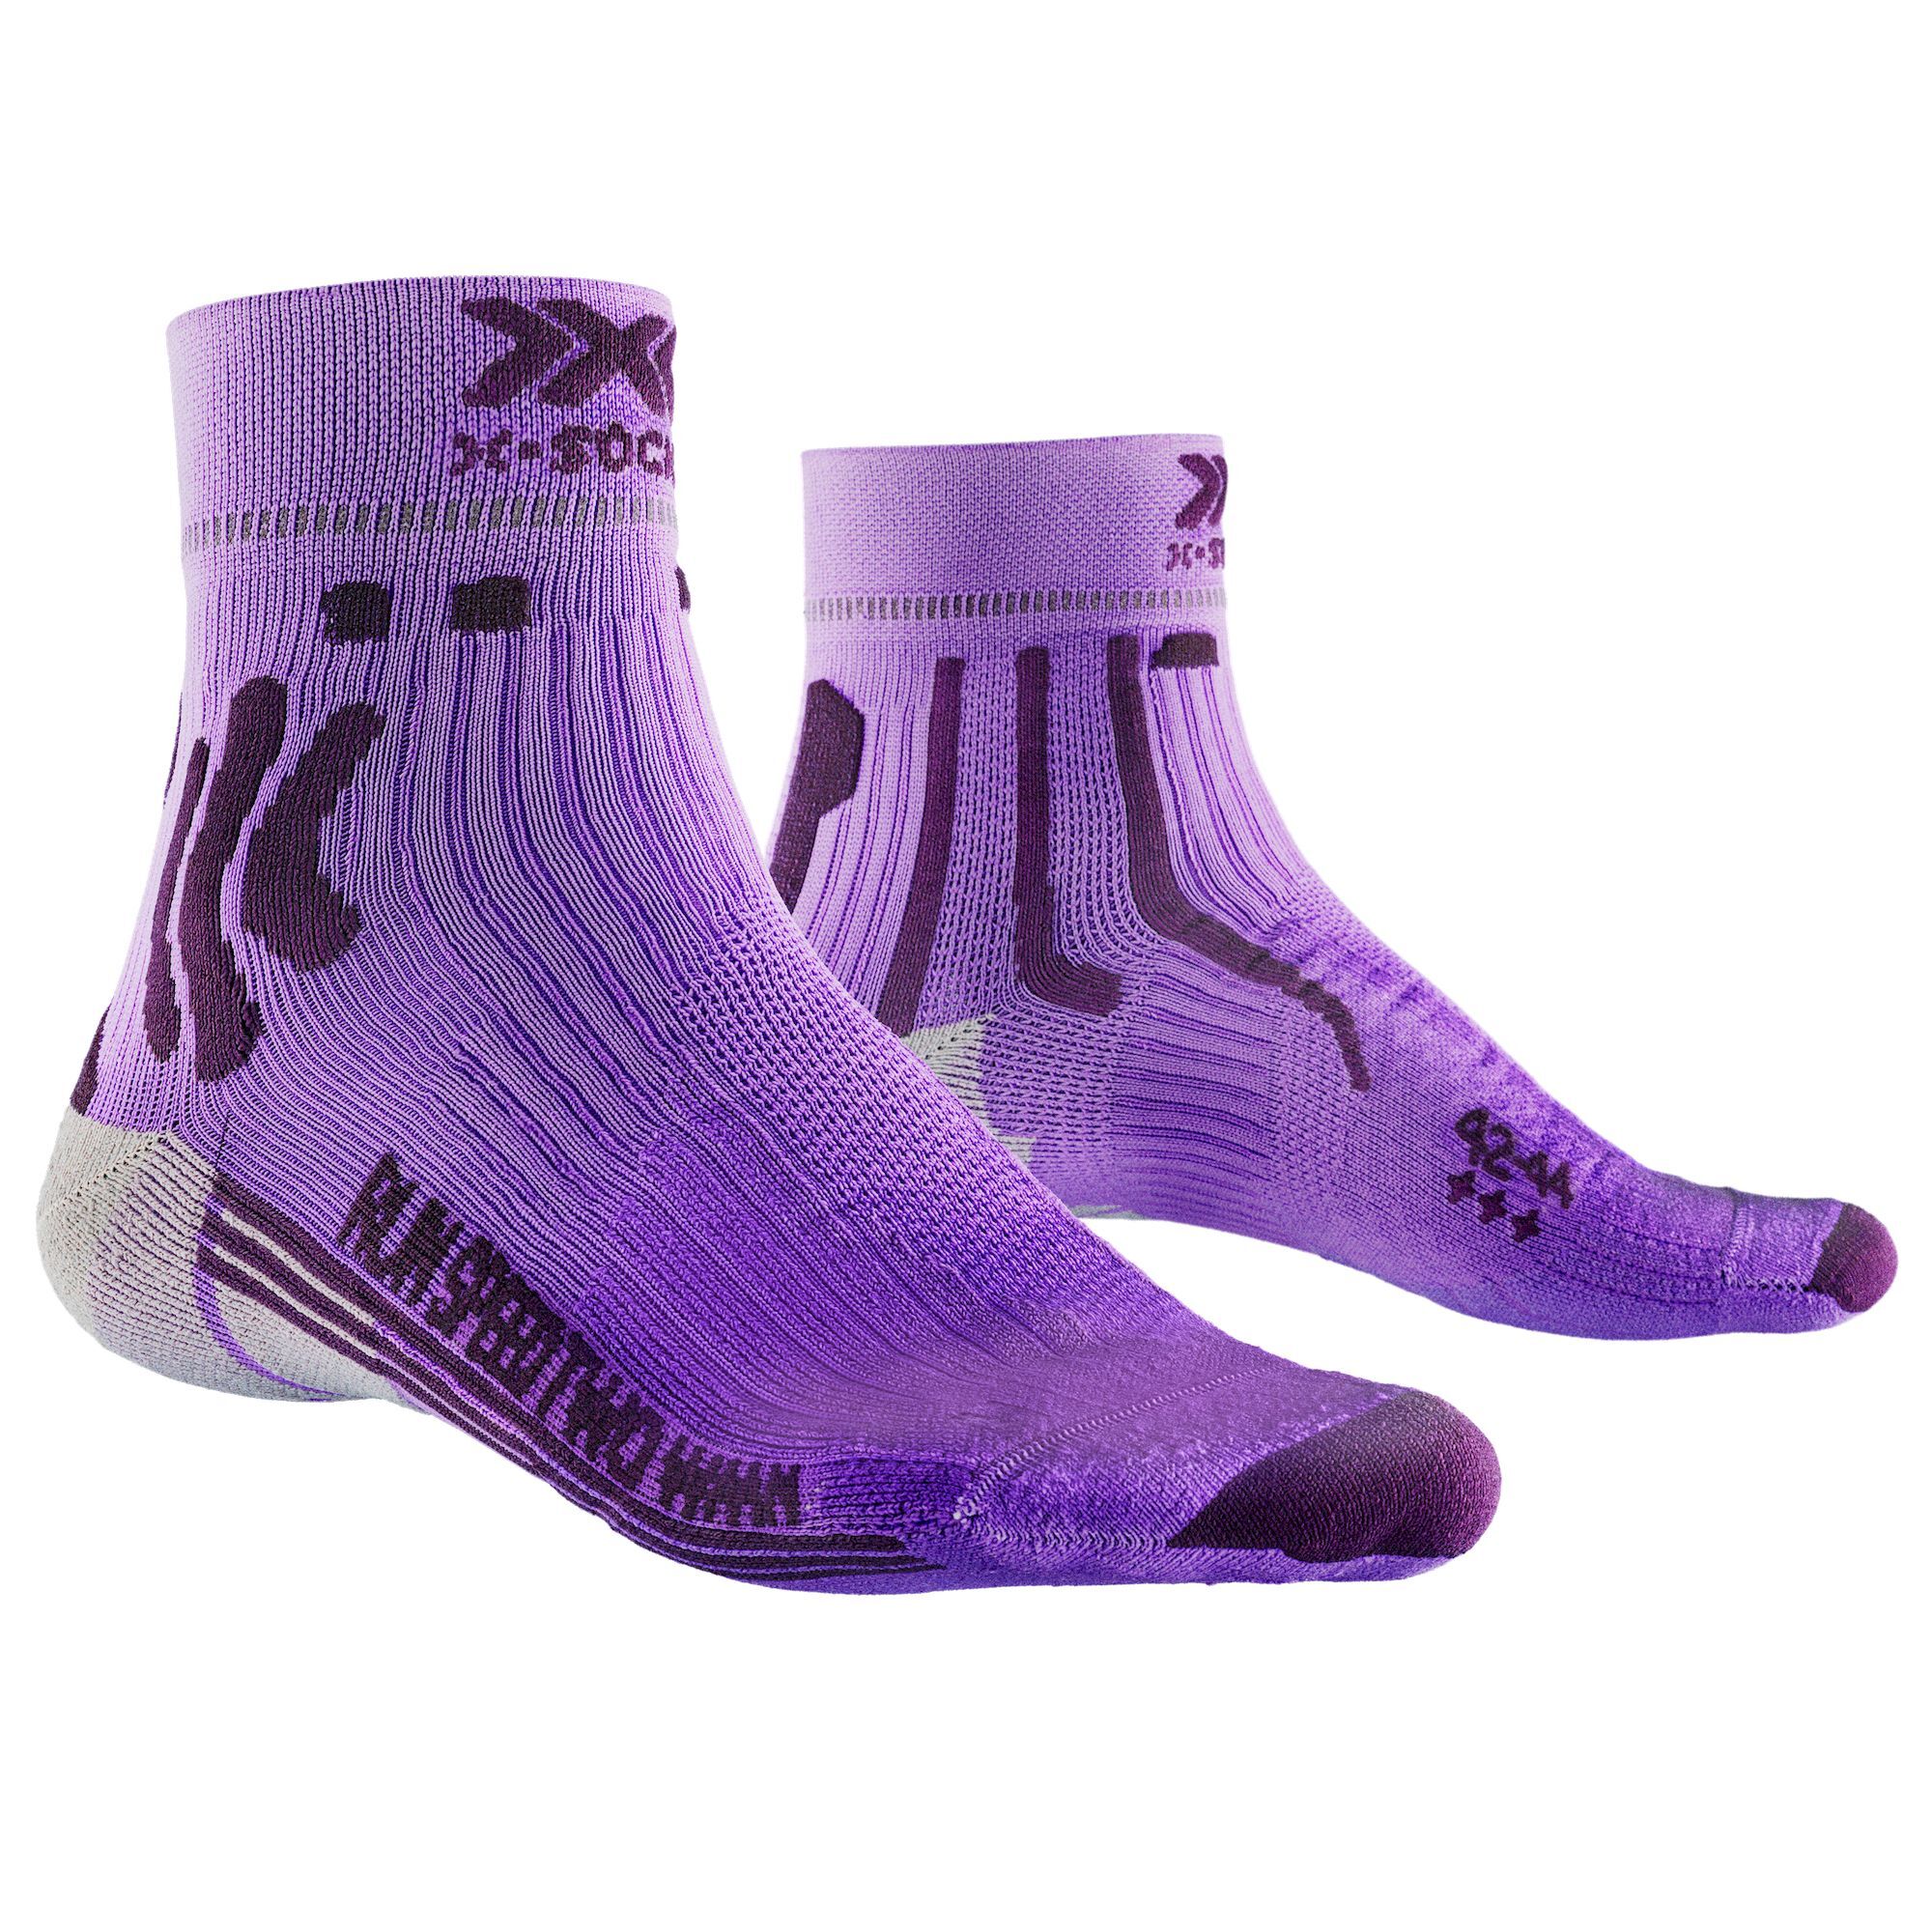 https://images.hardloop.fr/408064/x-socks-run-speed-two-40-calcetines-running-mujer.jpg?w=auto&h=auto&q=80